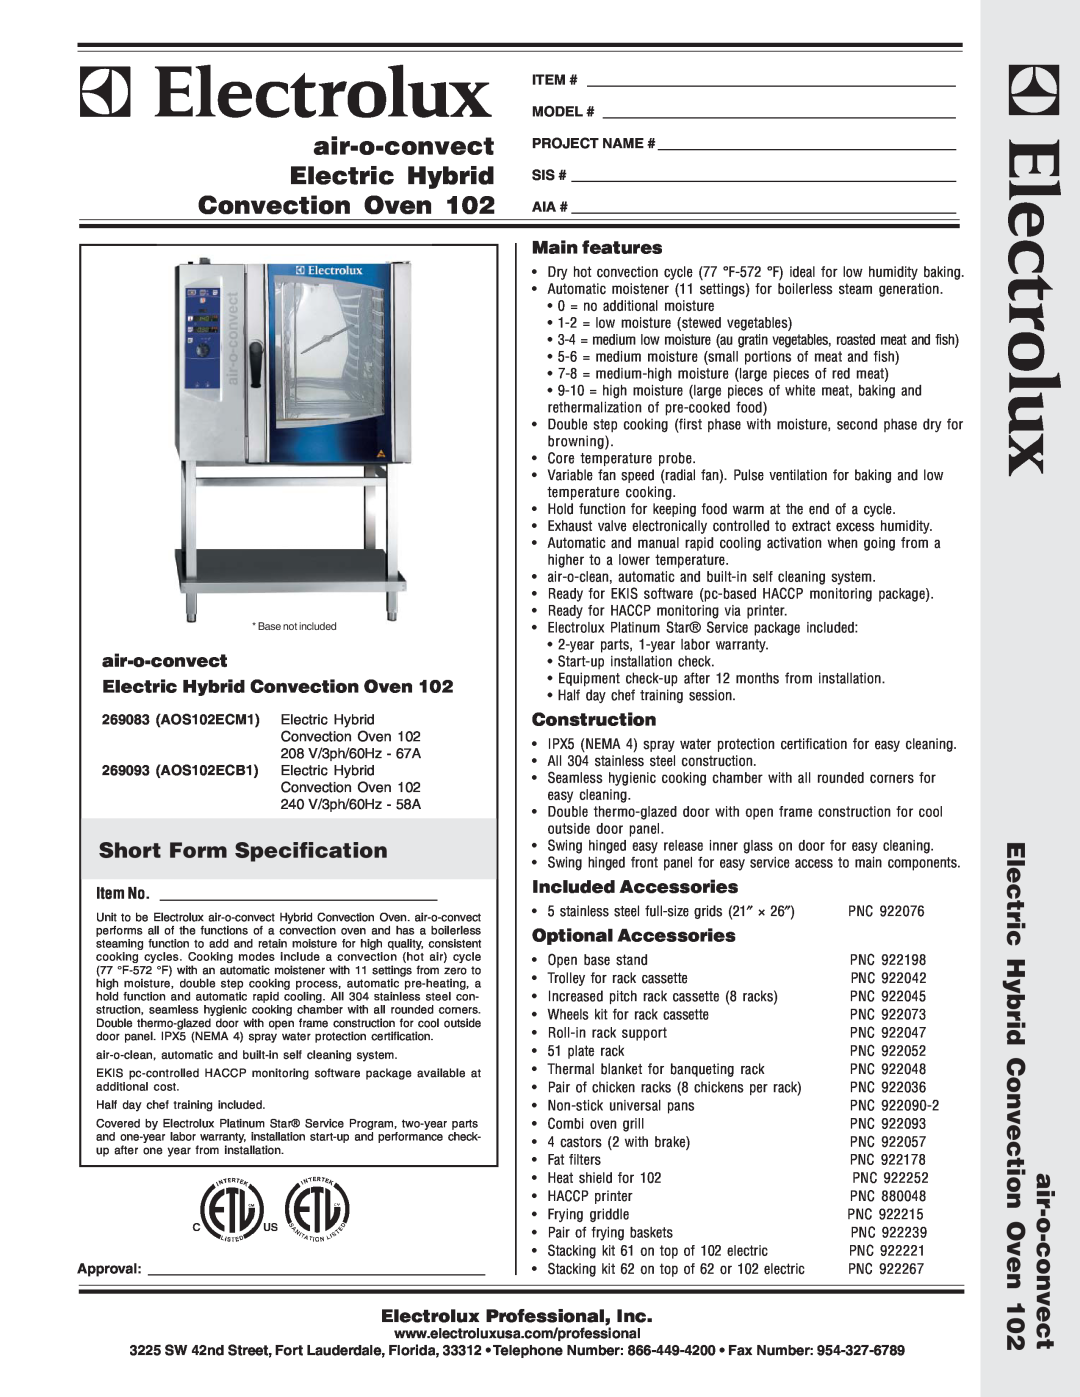 Electrolux AOS102ECB1 warranty Short Form Specification, air-o-convect Electric Hybrid Convection Oven, Main features 